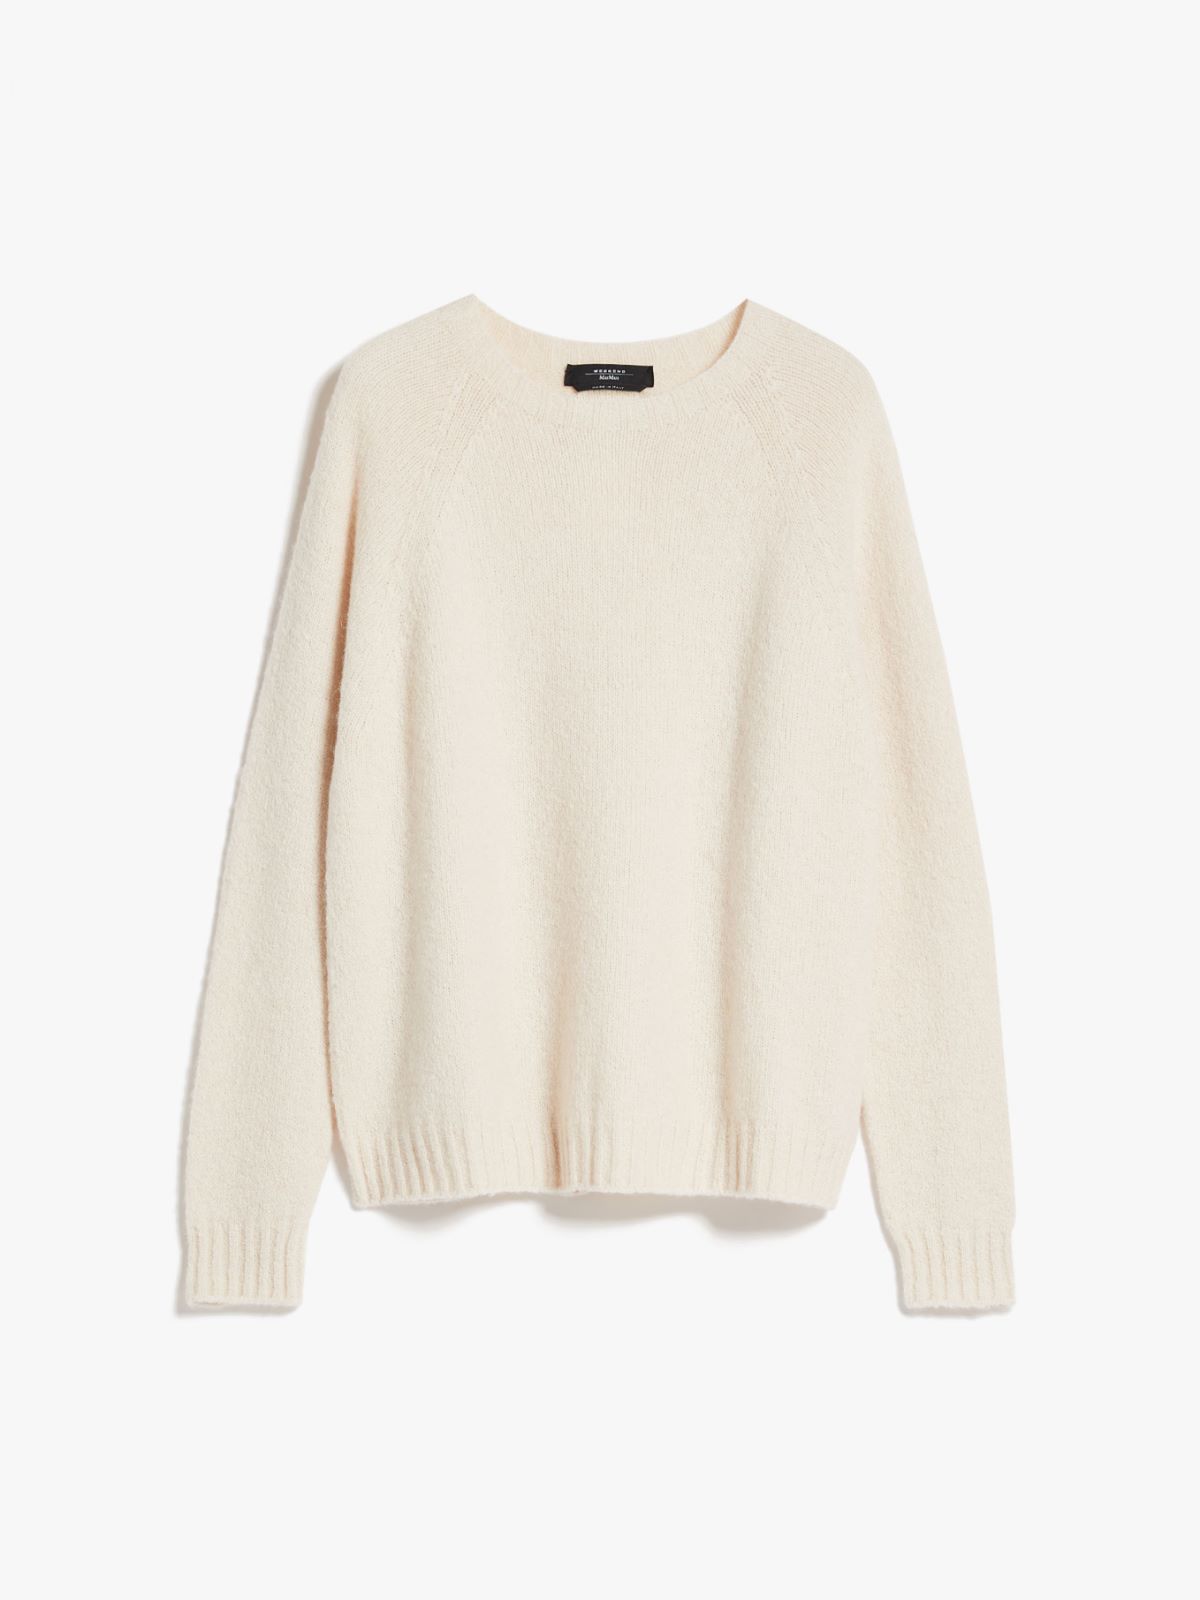 Soft knit top in alpaca and cotton - IVORY - Weekend Max Mara - 6